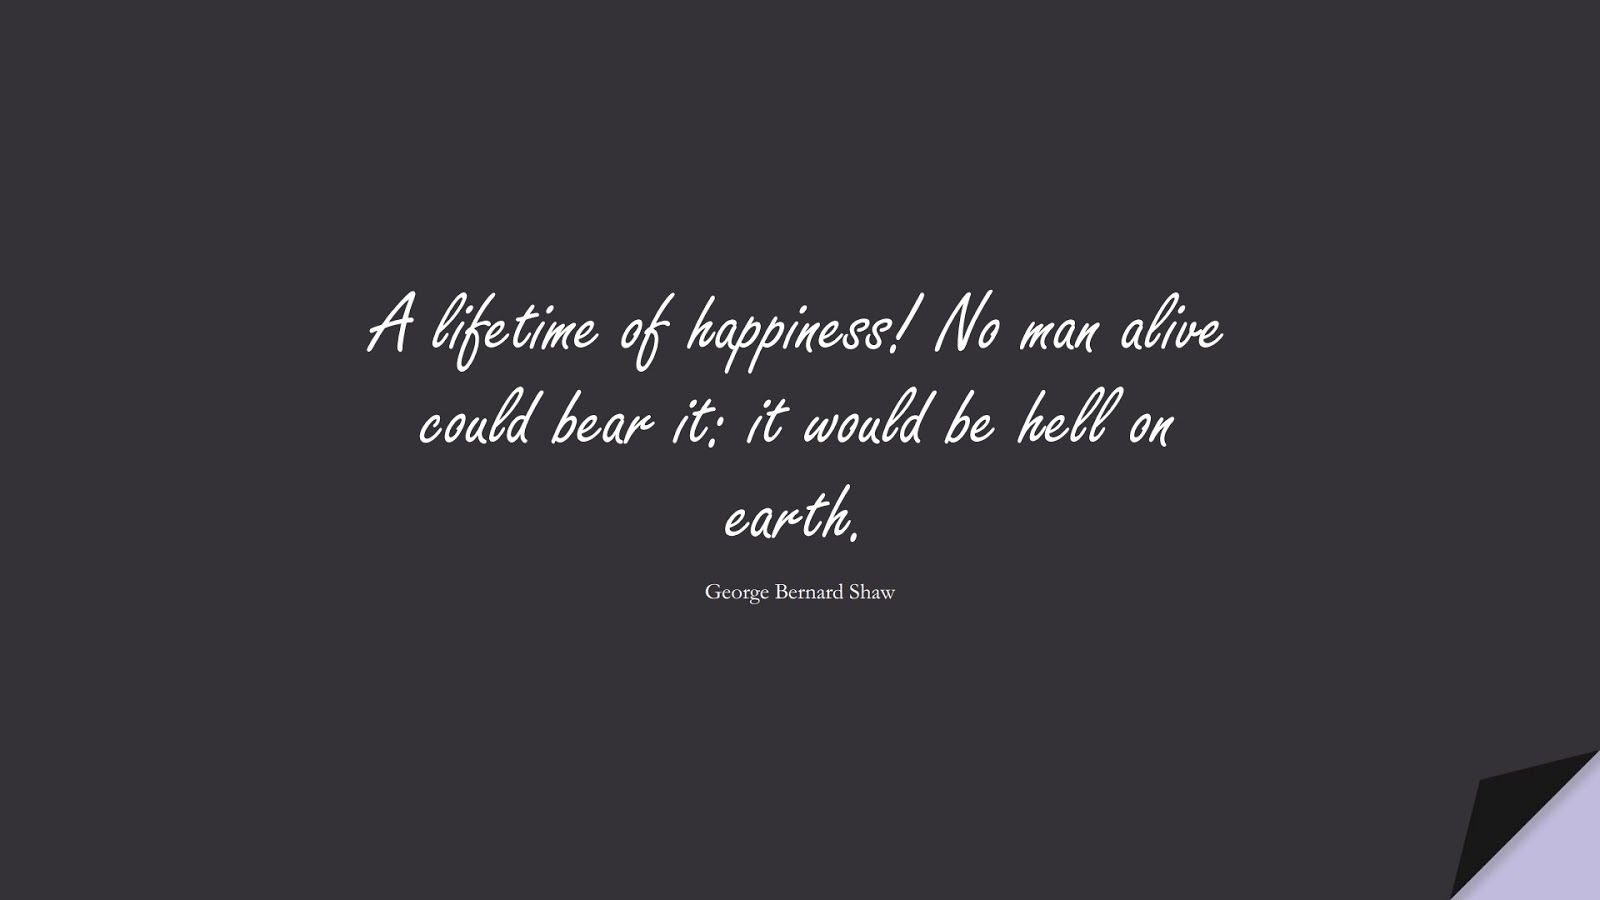 A lifetime of happiness! No man alive could bear it: it would be hell on earth. (George Bernard Shaw);  #ShortQuotes